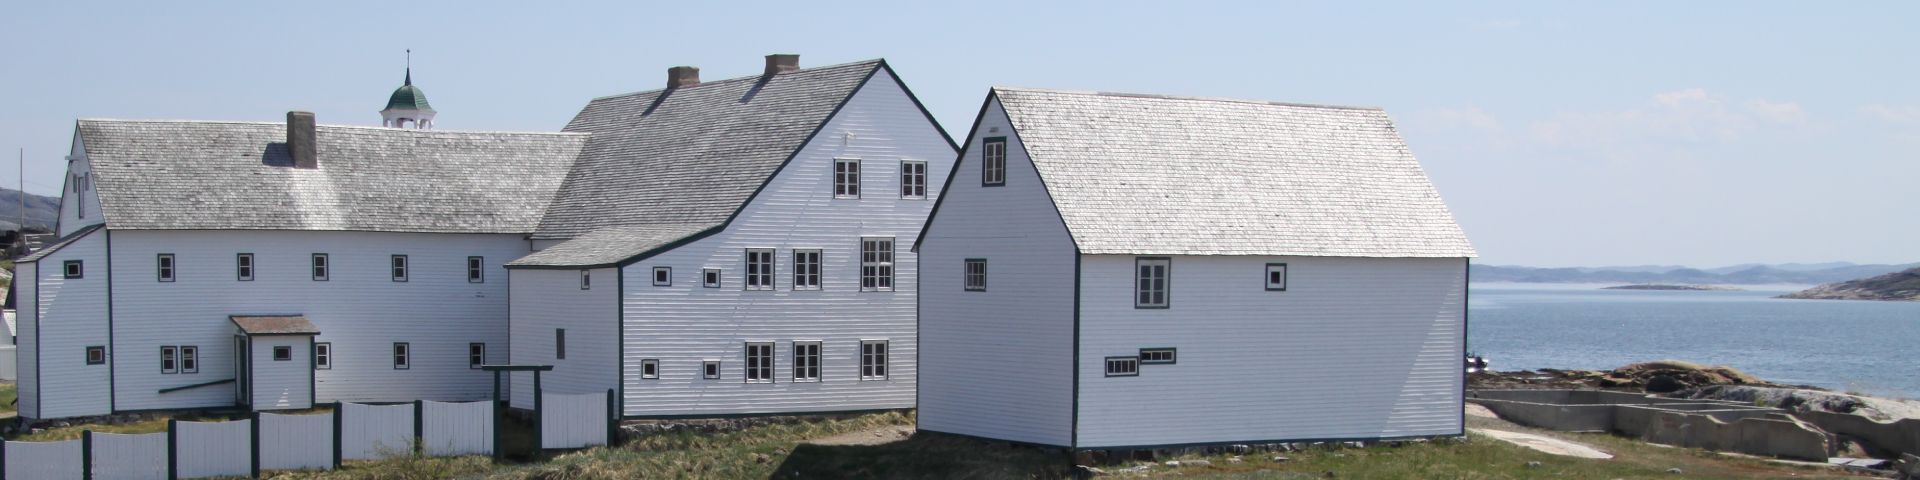 A group of visitors walk between two large wooden buildings at the Hopedale Mission National Historic Site